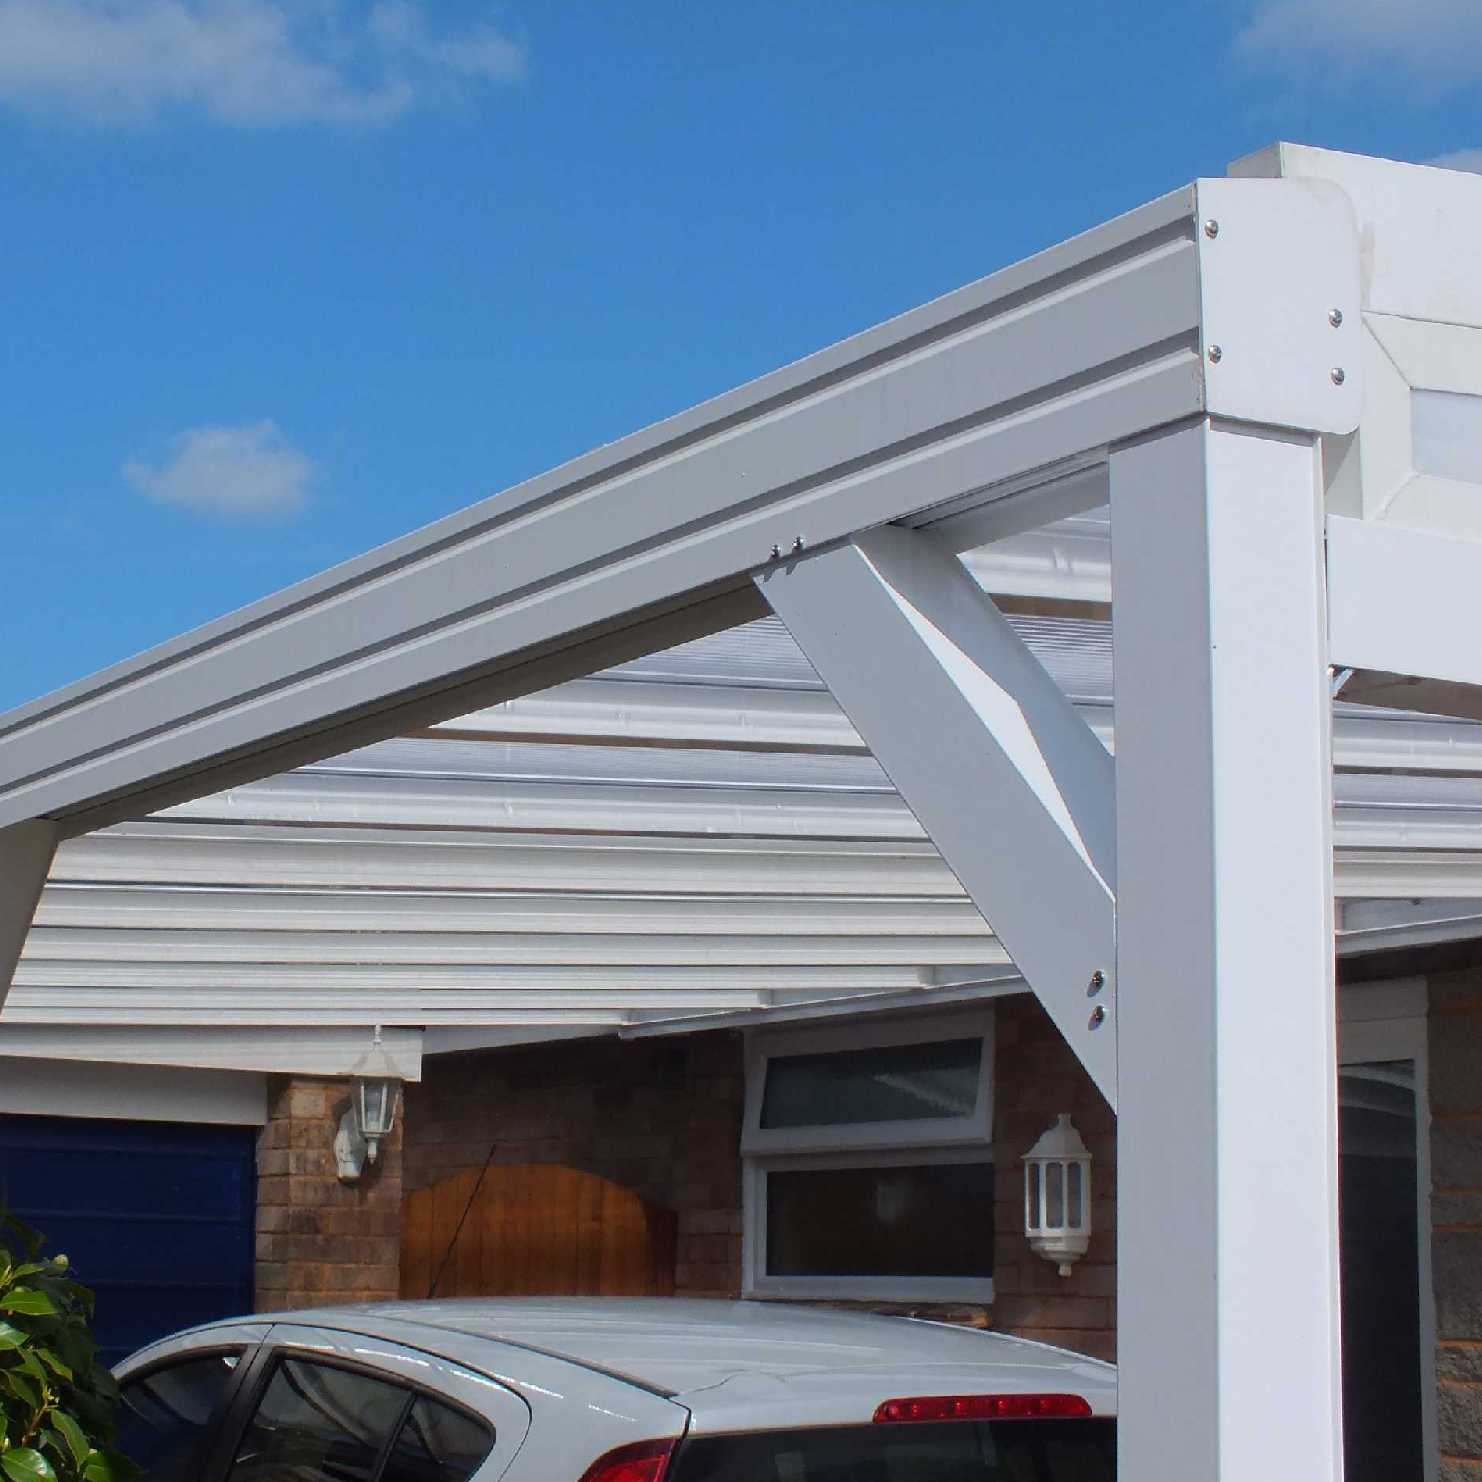 Great deals on Omega Smart Lean-To Canopy, White with 16mm Polycarbonate Glazing - 12.0m (W) x 2.5m (P), (5) Supporting Posts